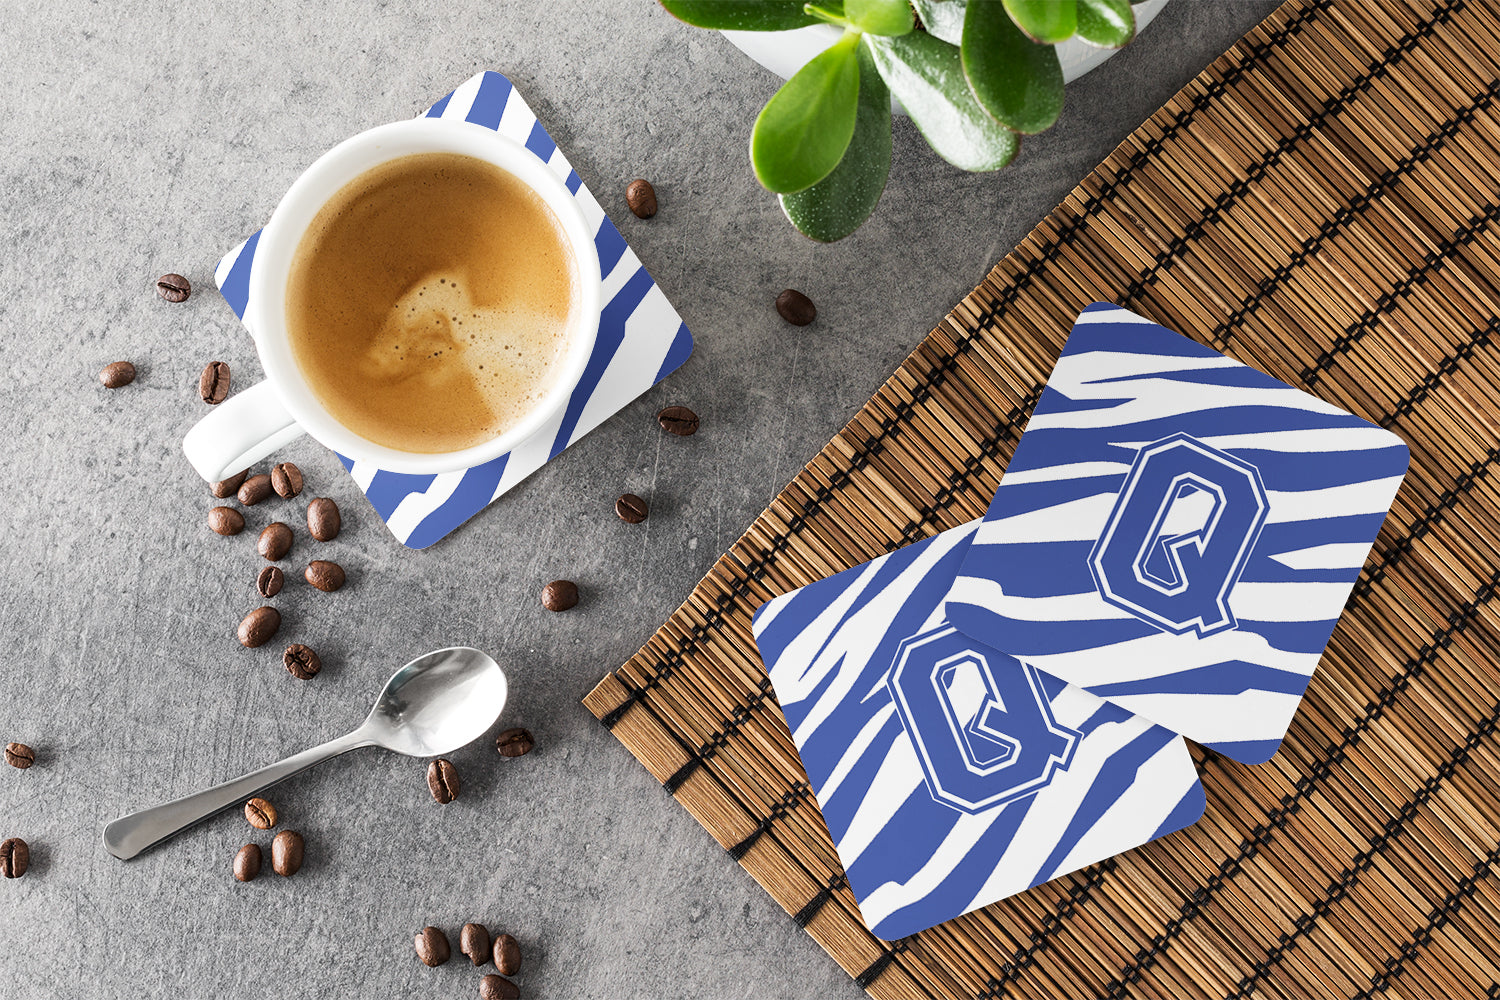 Set of 4 Monogram - Tiger Stripe Blue and White Foam Coasters Initial Letter Q - the-store.com